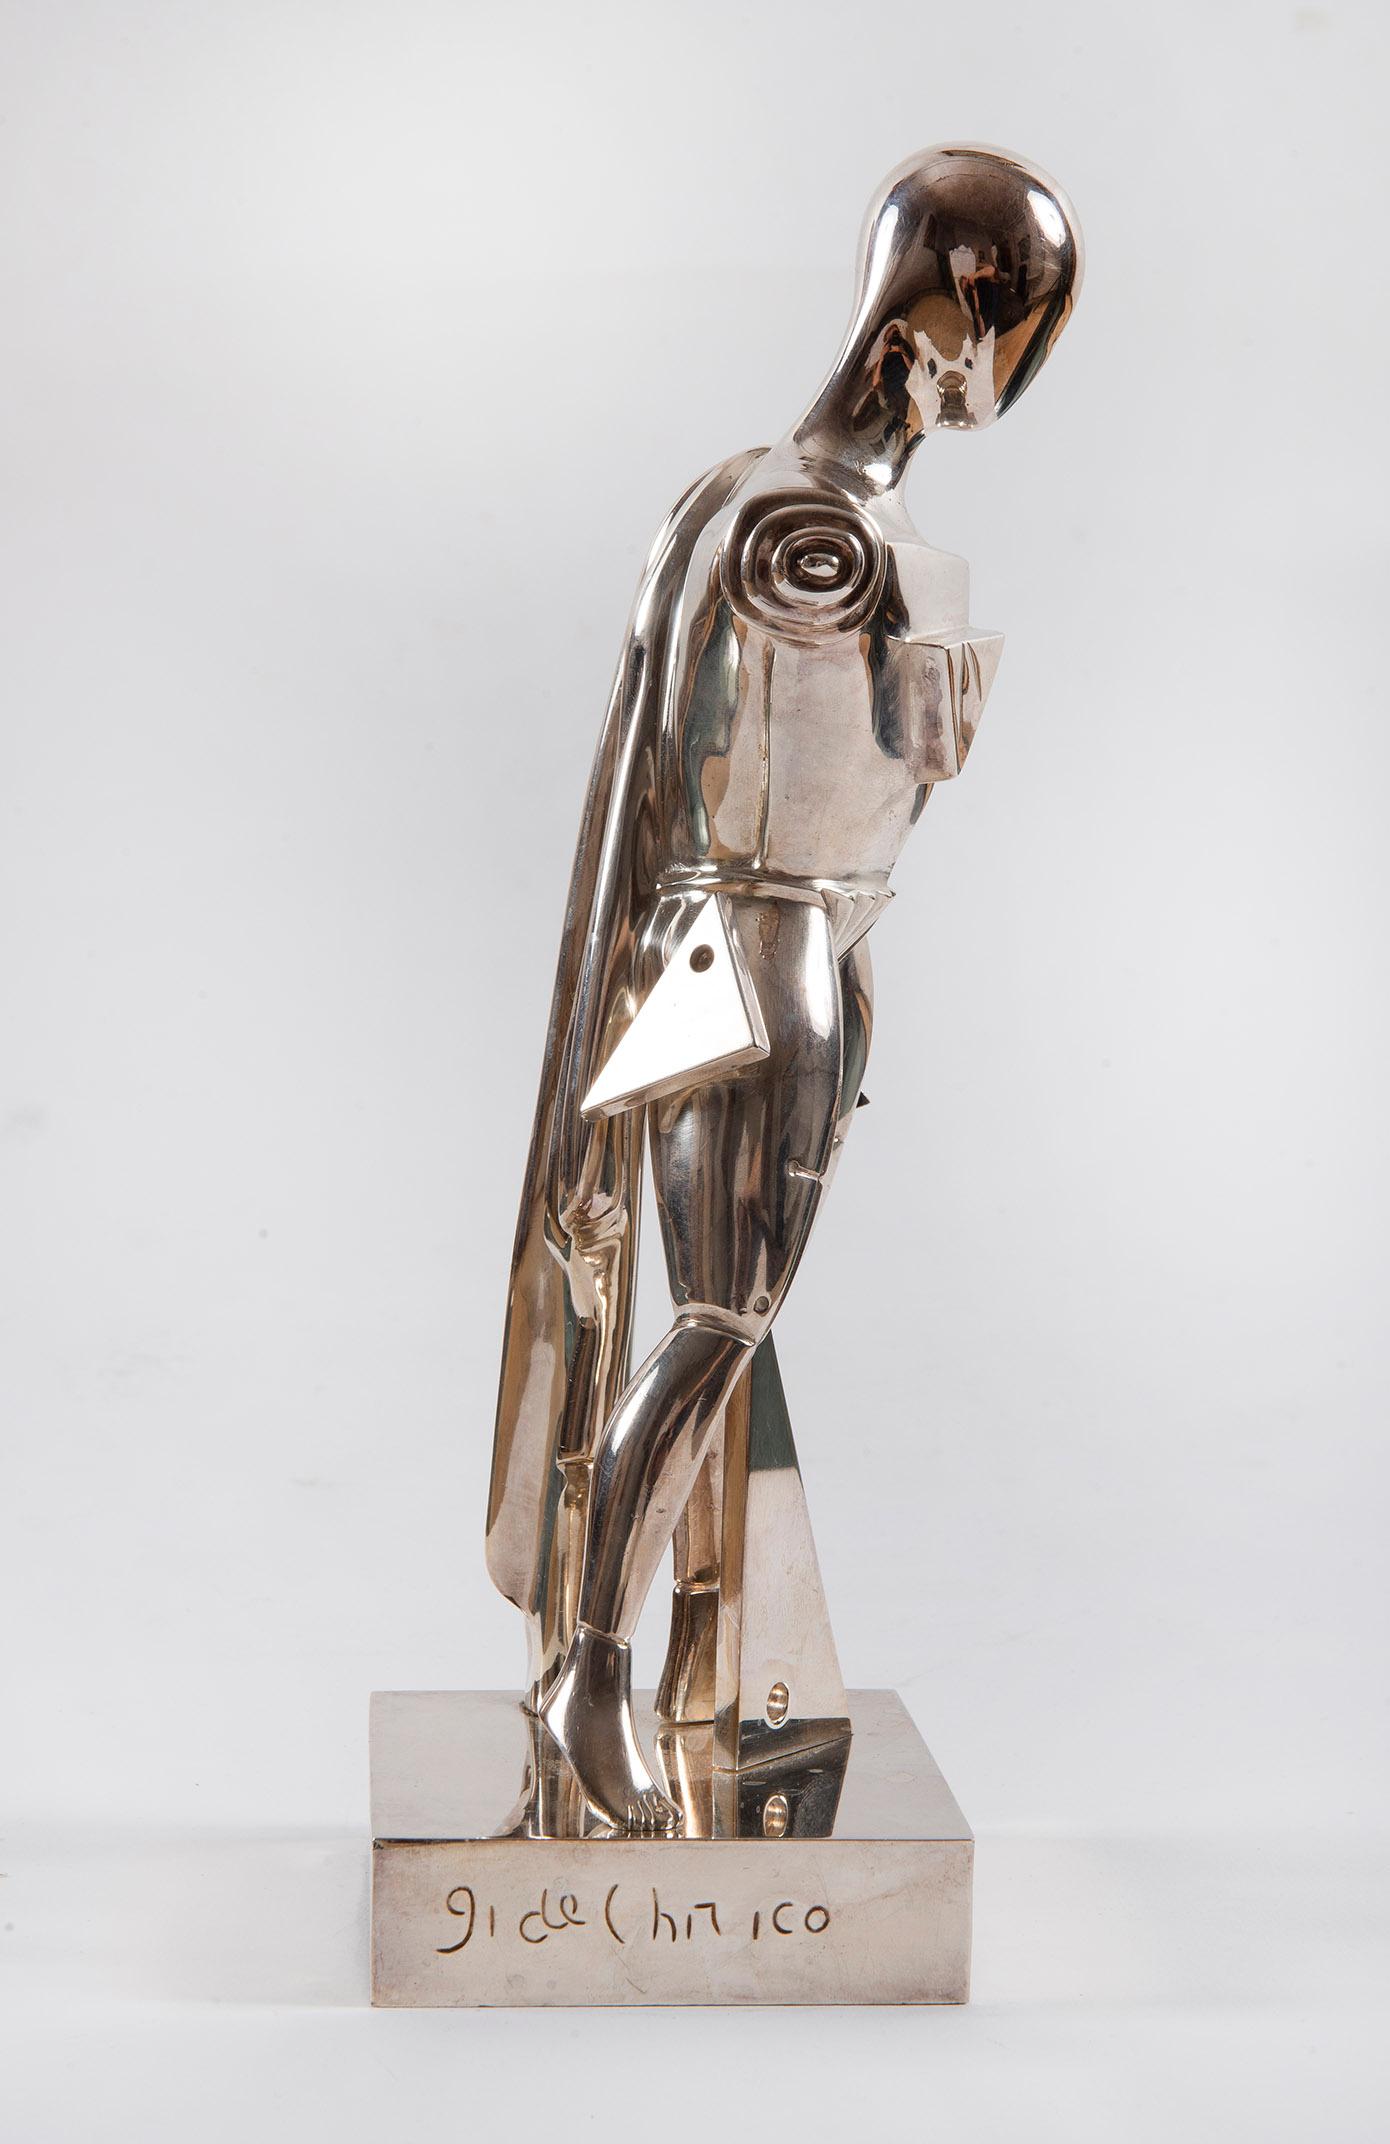 Il Trovatore, Chirico, Multiples, 1970's, Bronze, Sculpture, Surrealiste

Il trovatore
Ed. 250 pcs
1971
Bronze with silver patina
H. 31 cm
Signed and dated on the base :
Editions Artcurial, Paris.